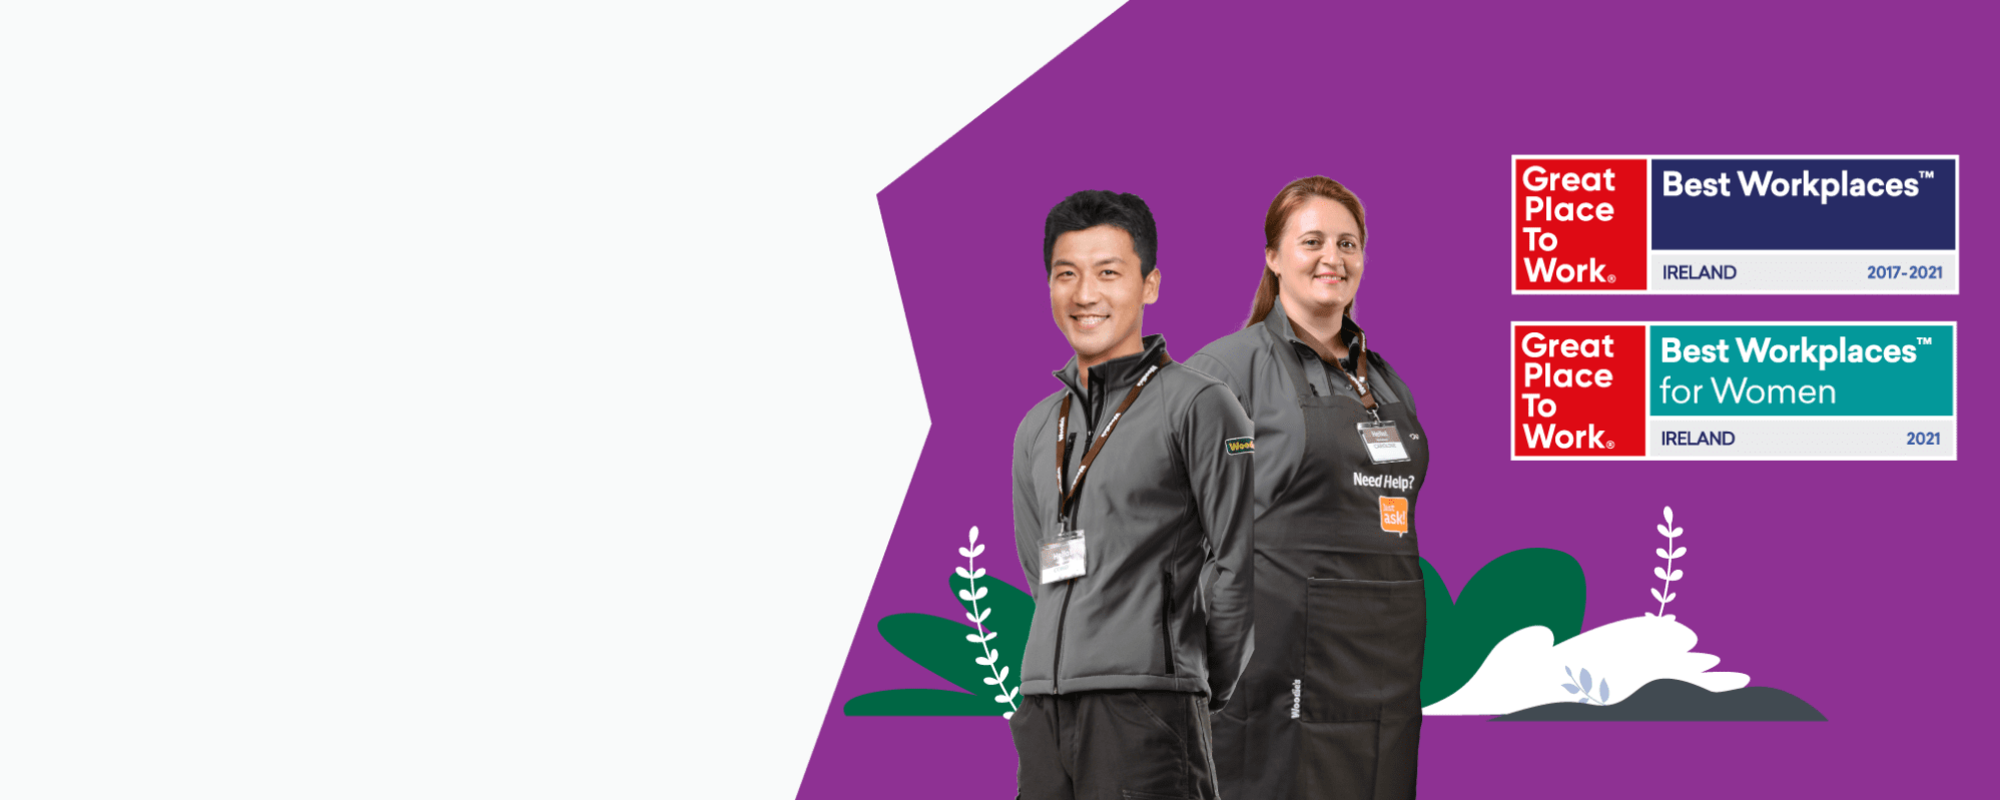 •	On Display: Three people of diverse backgrounds in our Woodie’s uniforms with Great Place to Work Logos